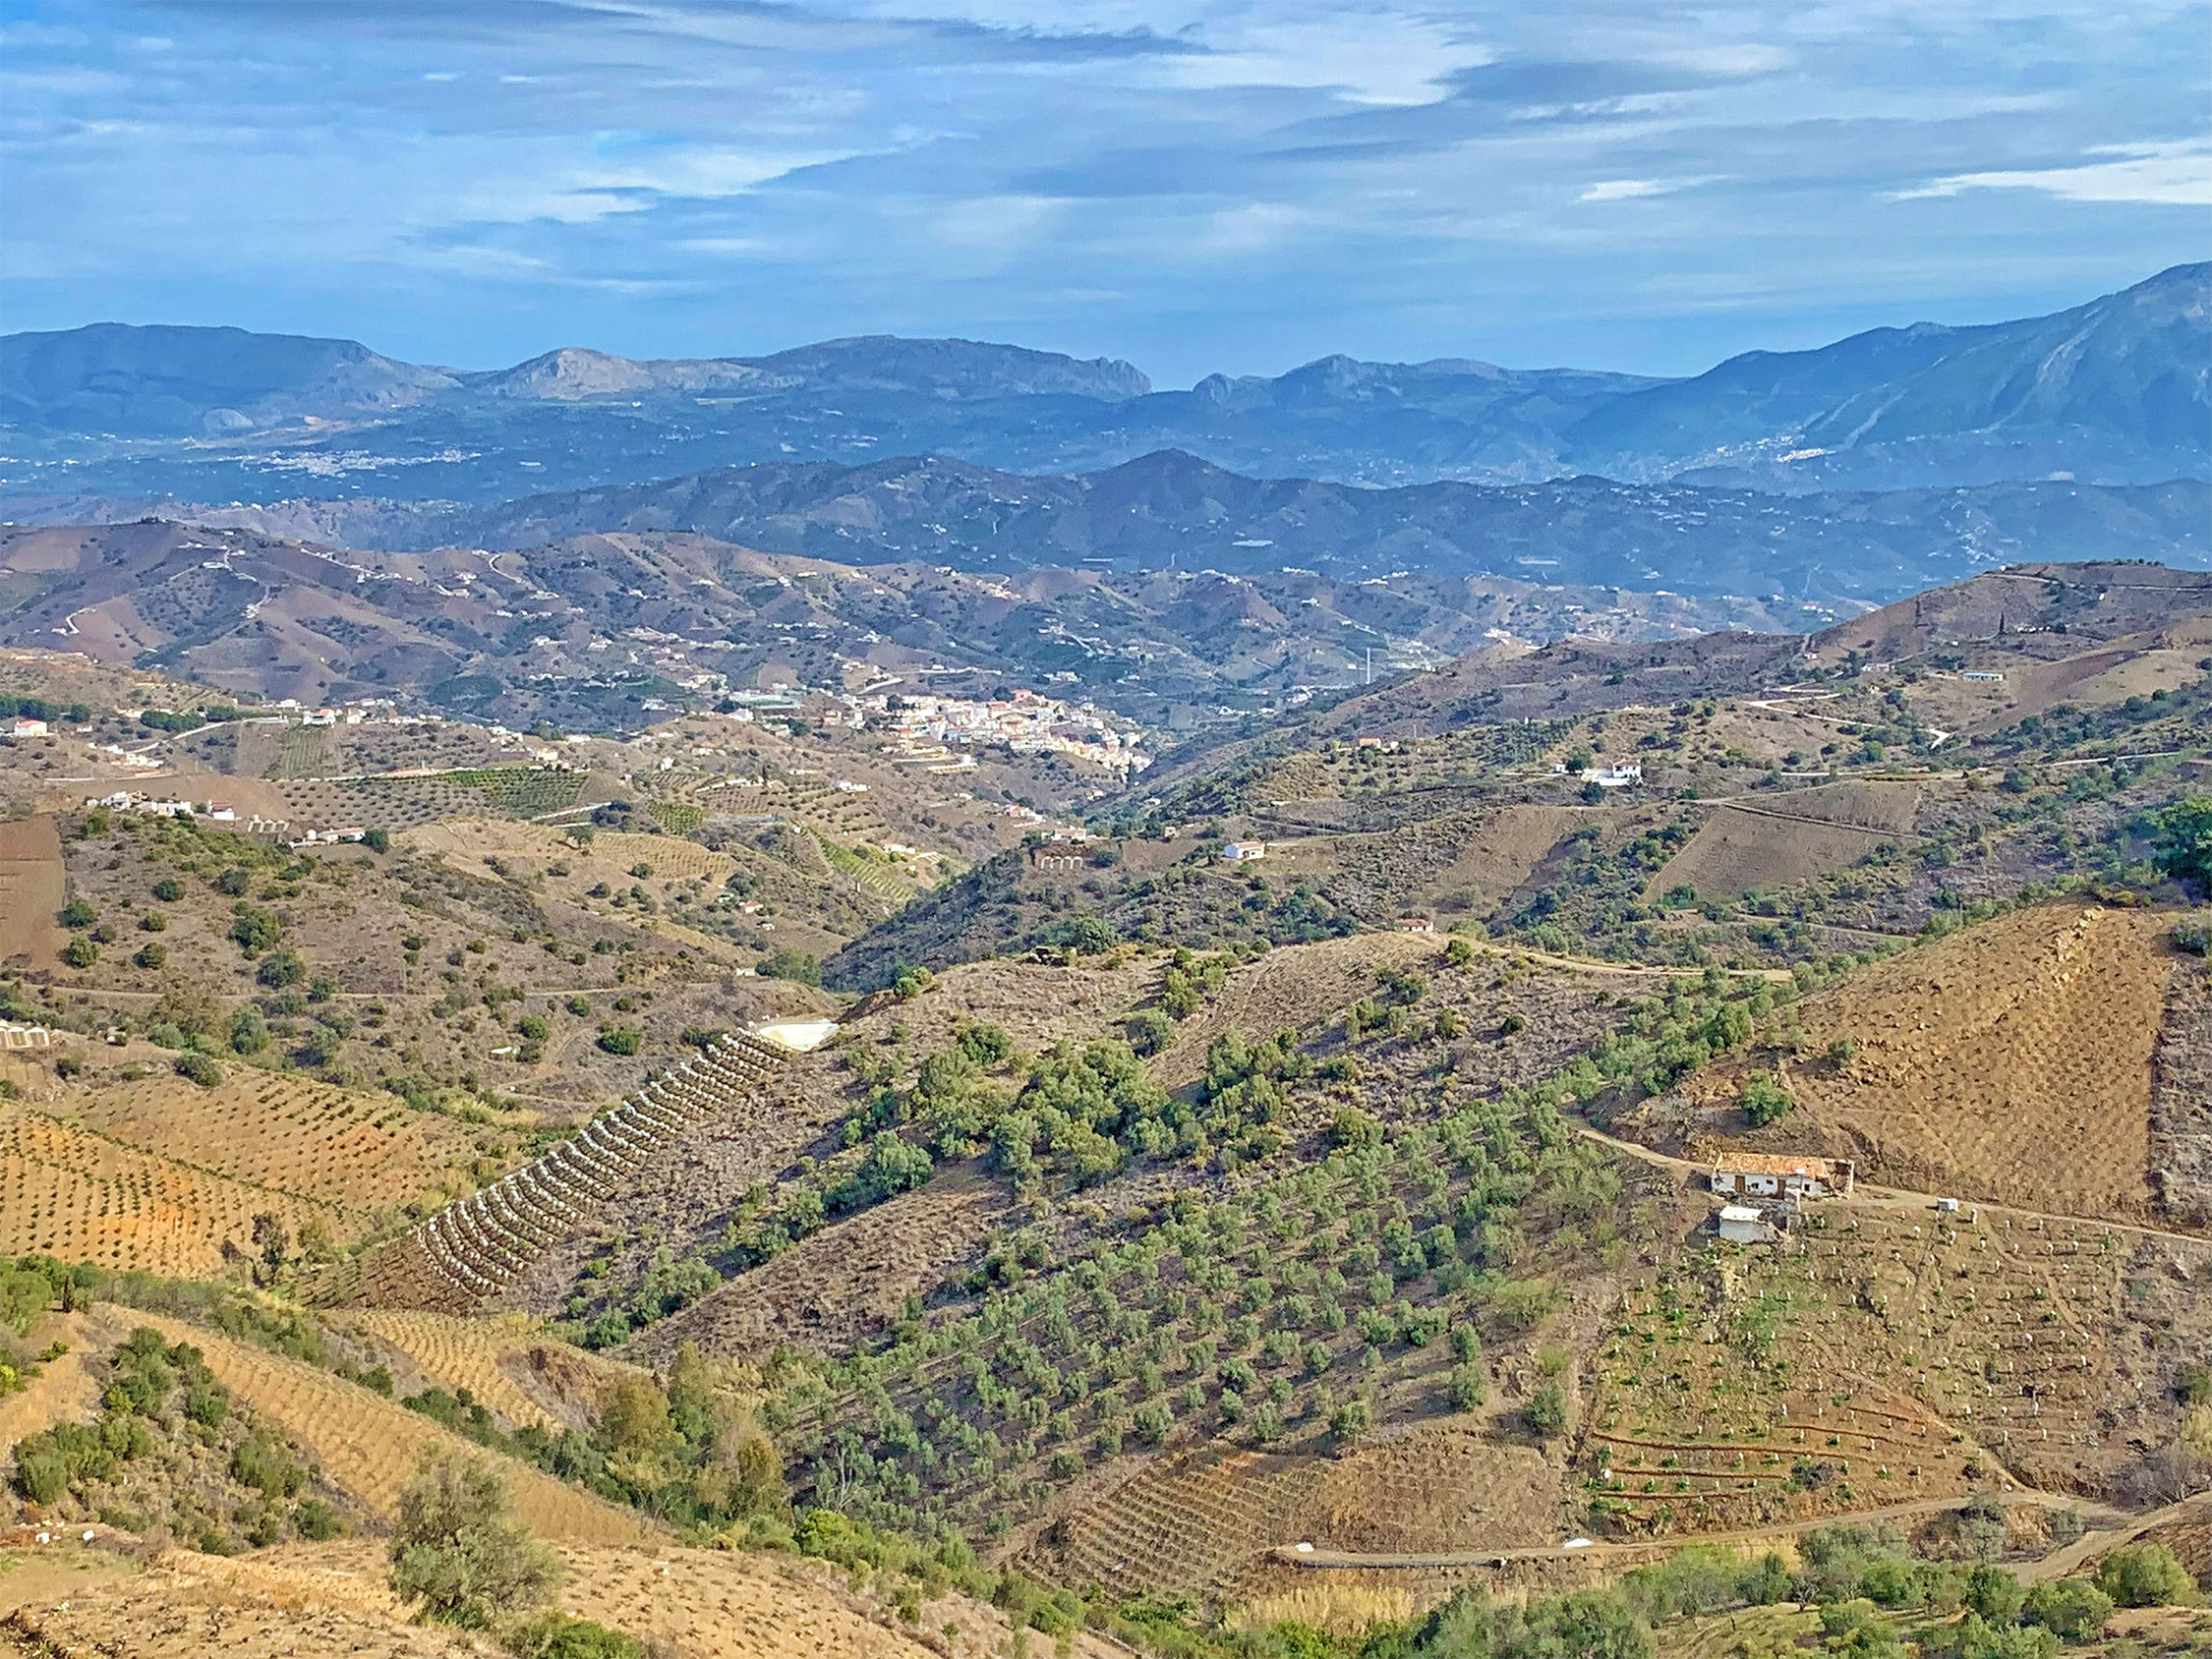 Wines from Axarquia in Malaga: heroic viticulture | CÚRATE Trips